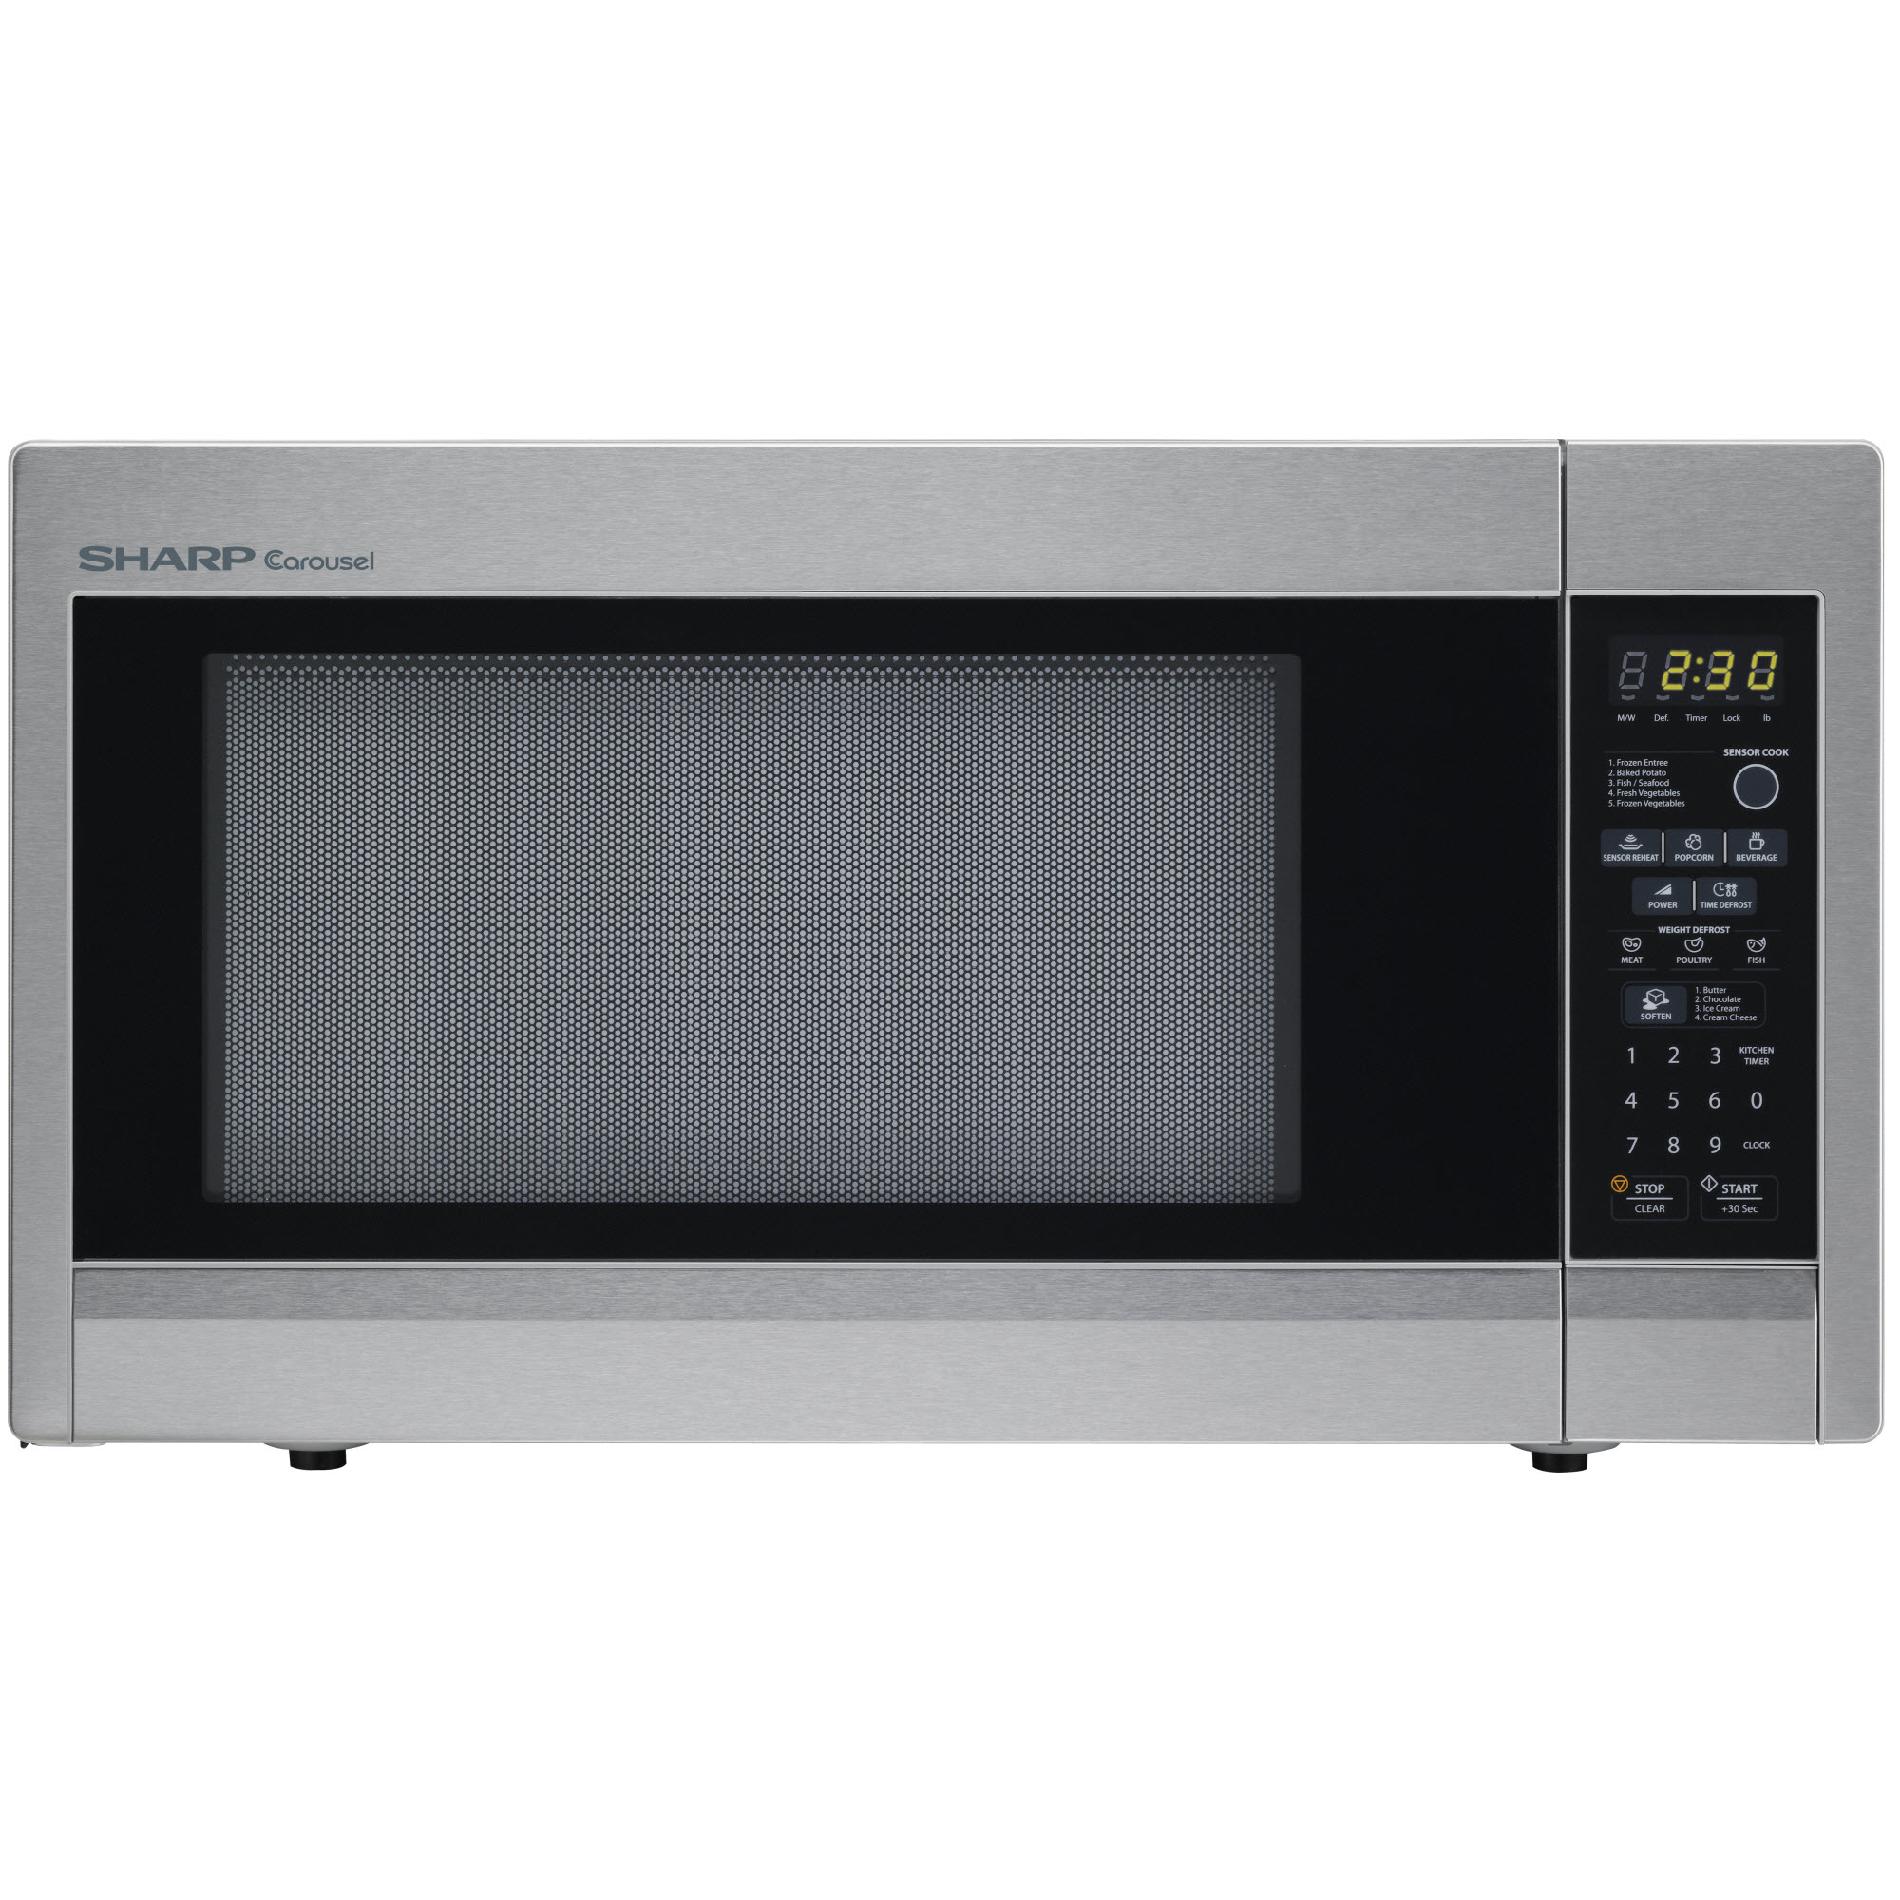 Sharp 1.8 cu. ft. Countertop Microwave Stainless steel